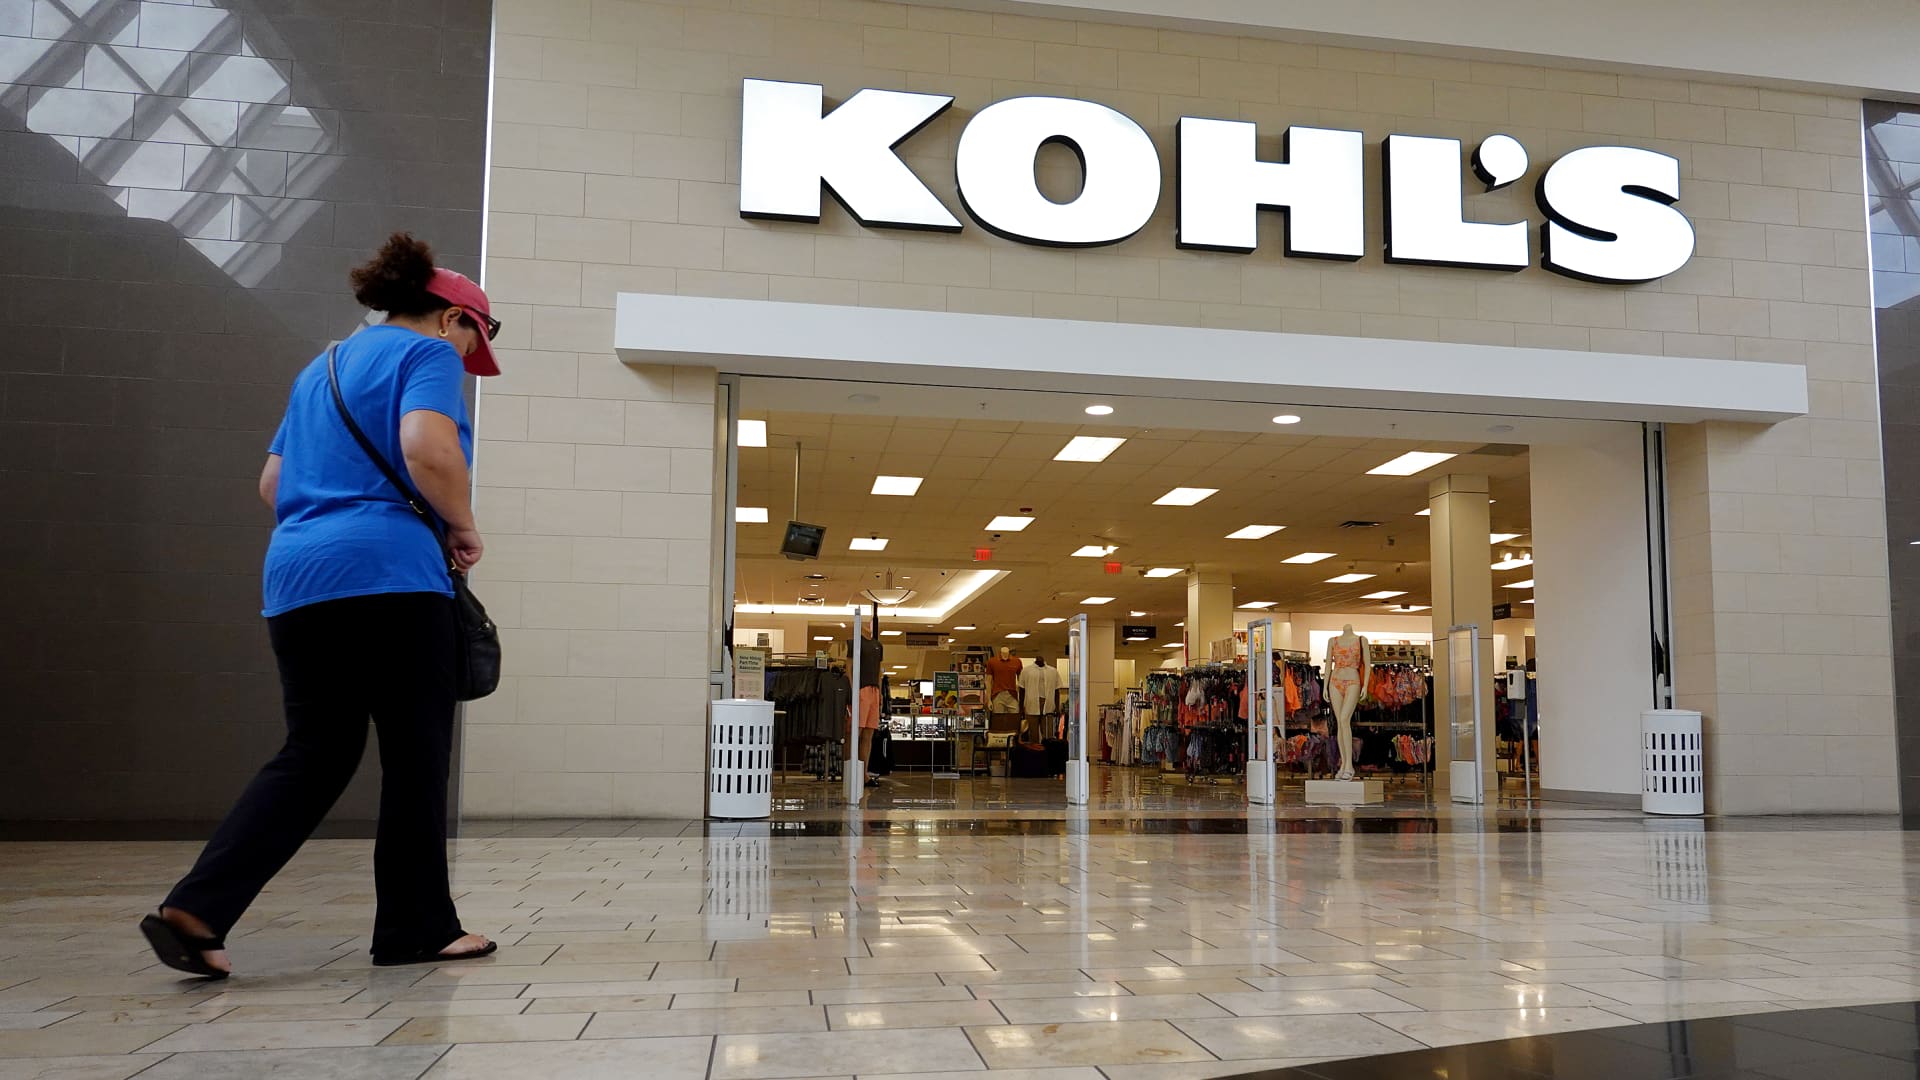 Kohl’s cuts guidance, blaming inflation for softer sales from middle-income shoppers